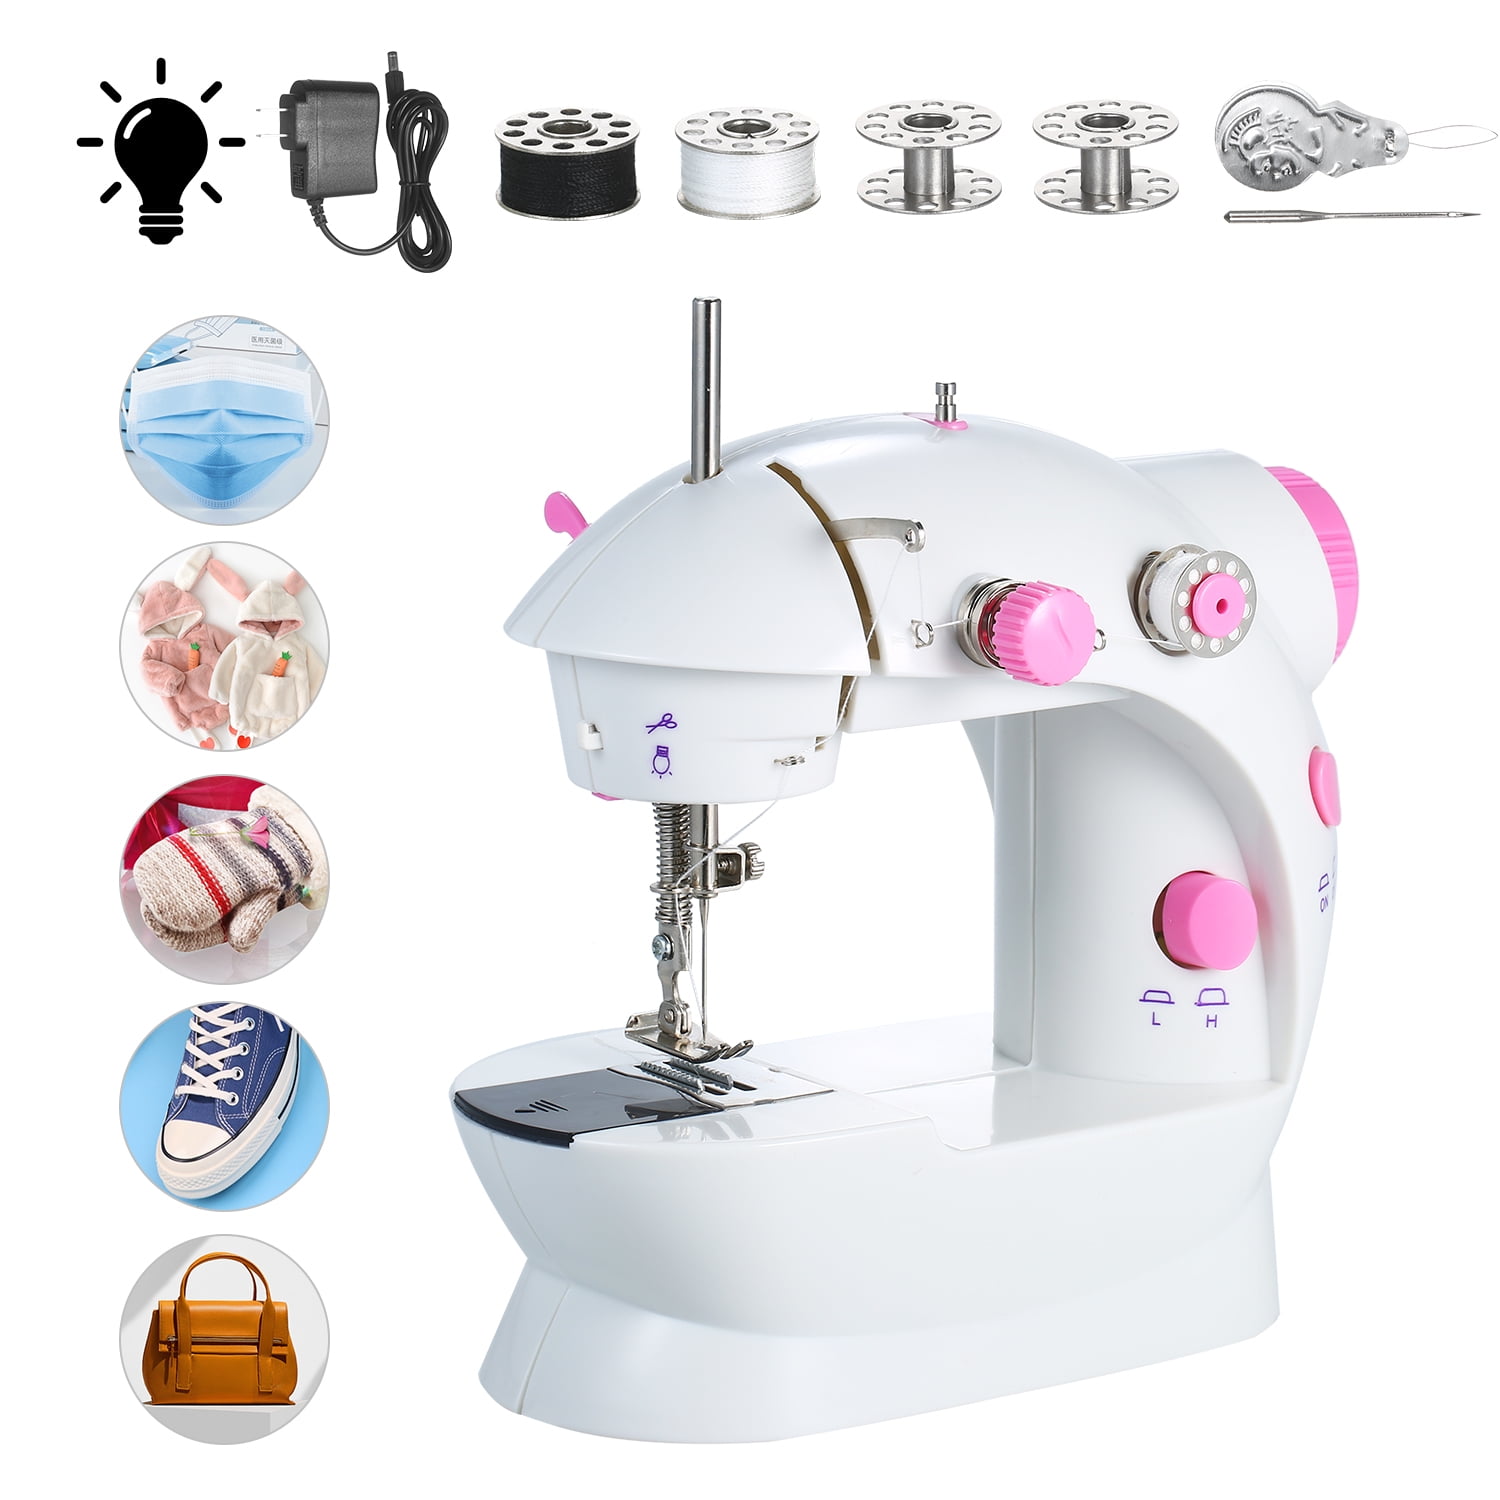 Mini Electric Sewing Stitch Machine Handheld 2 Speed Foot Pedal LED Home DIY 